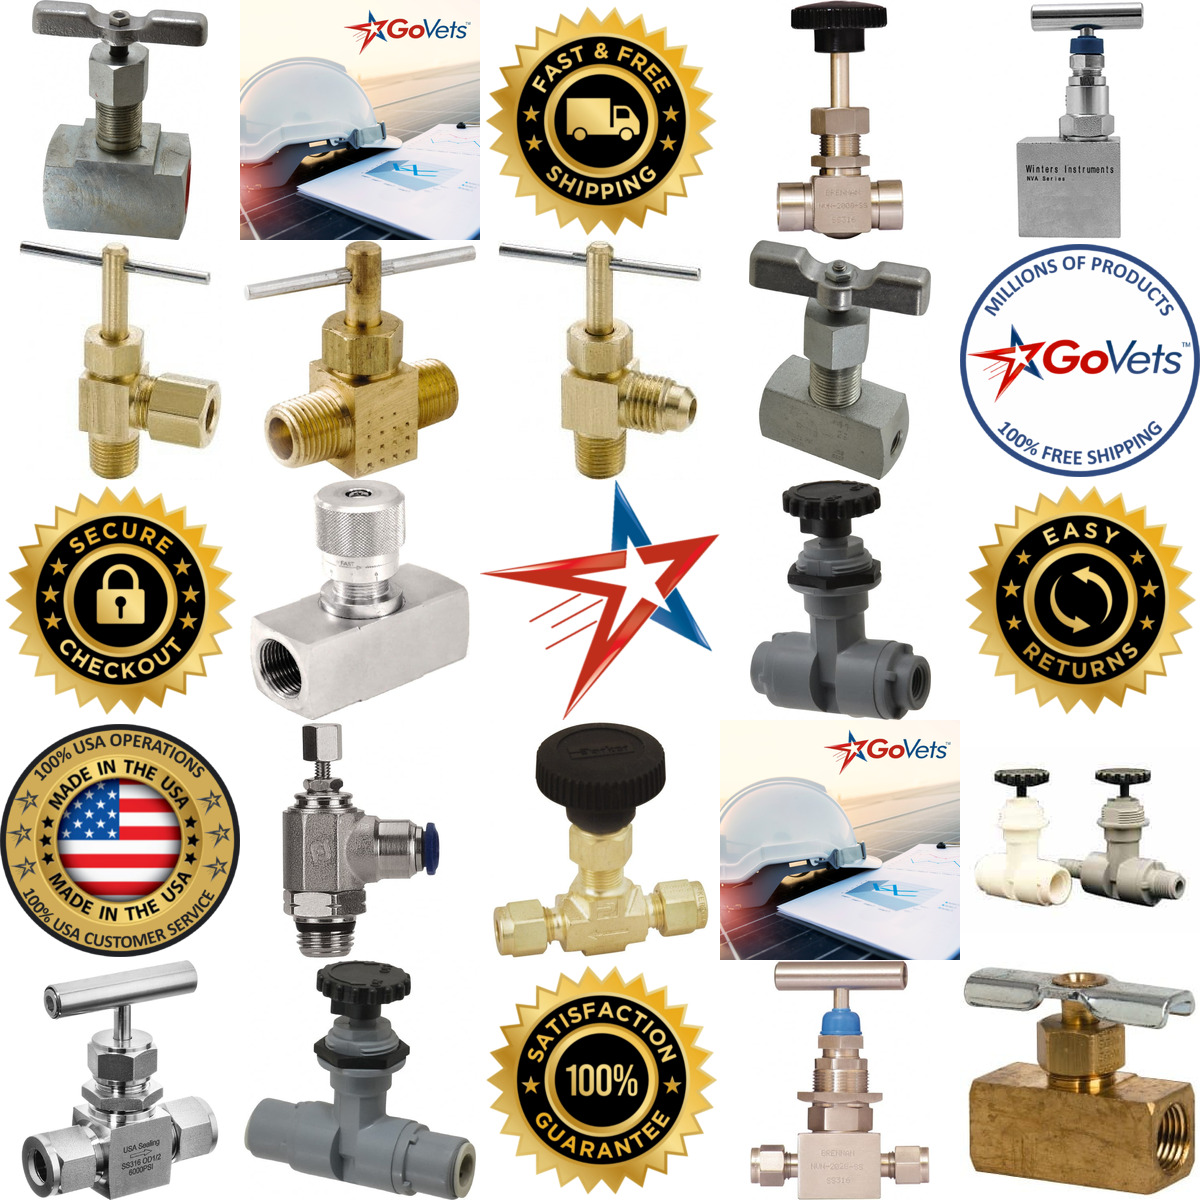 A selection of Needle Valves products on GoVets